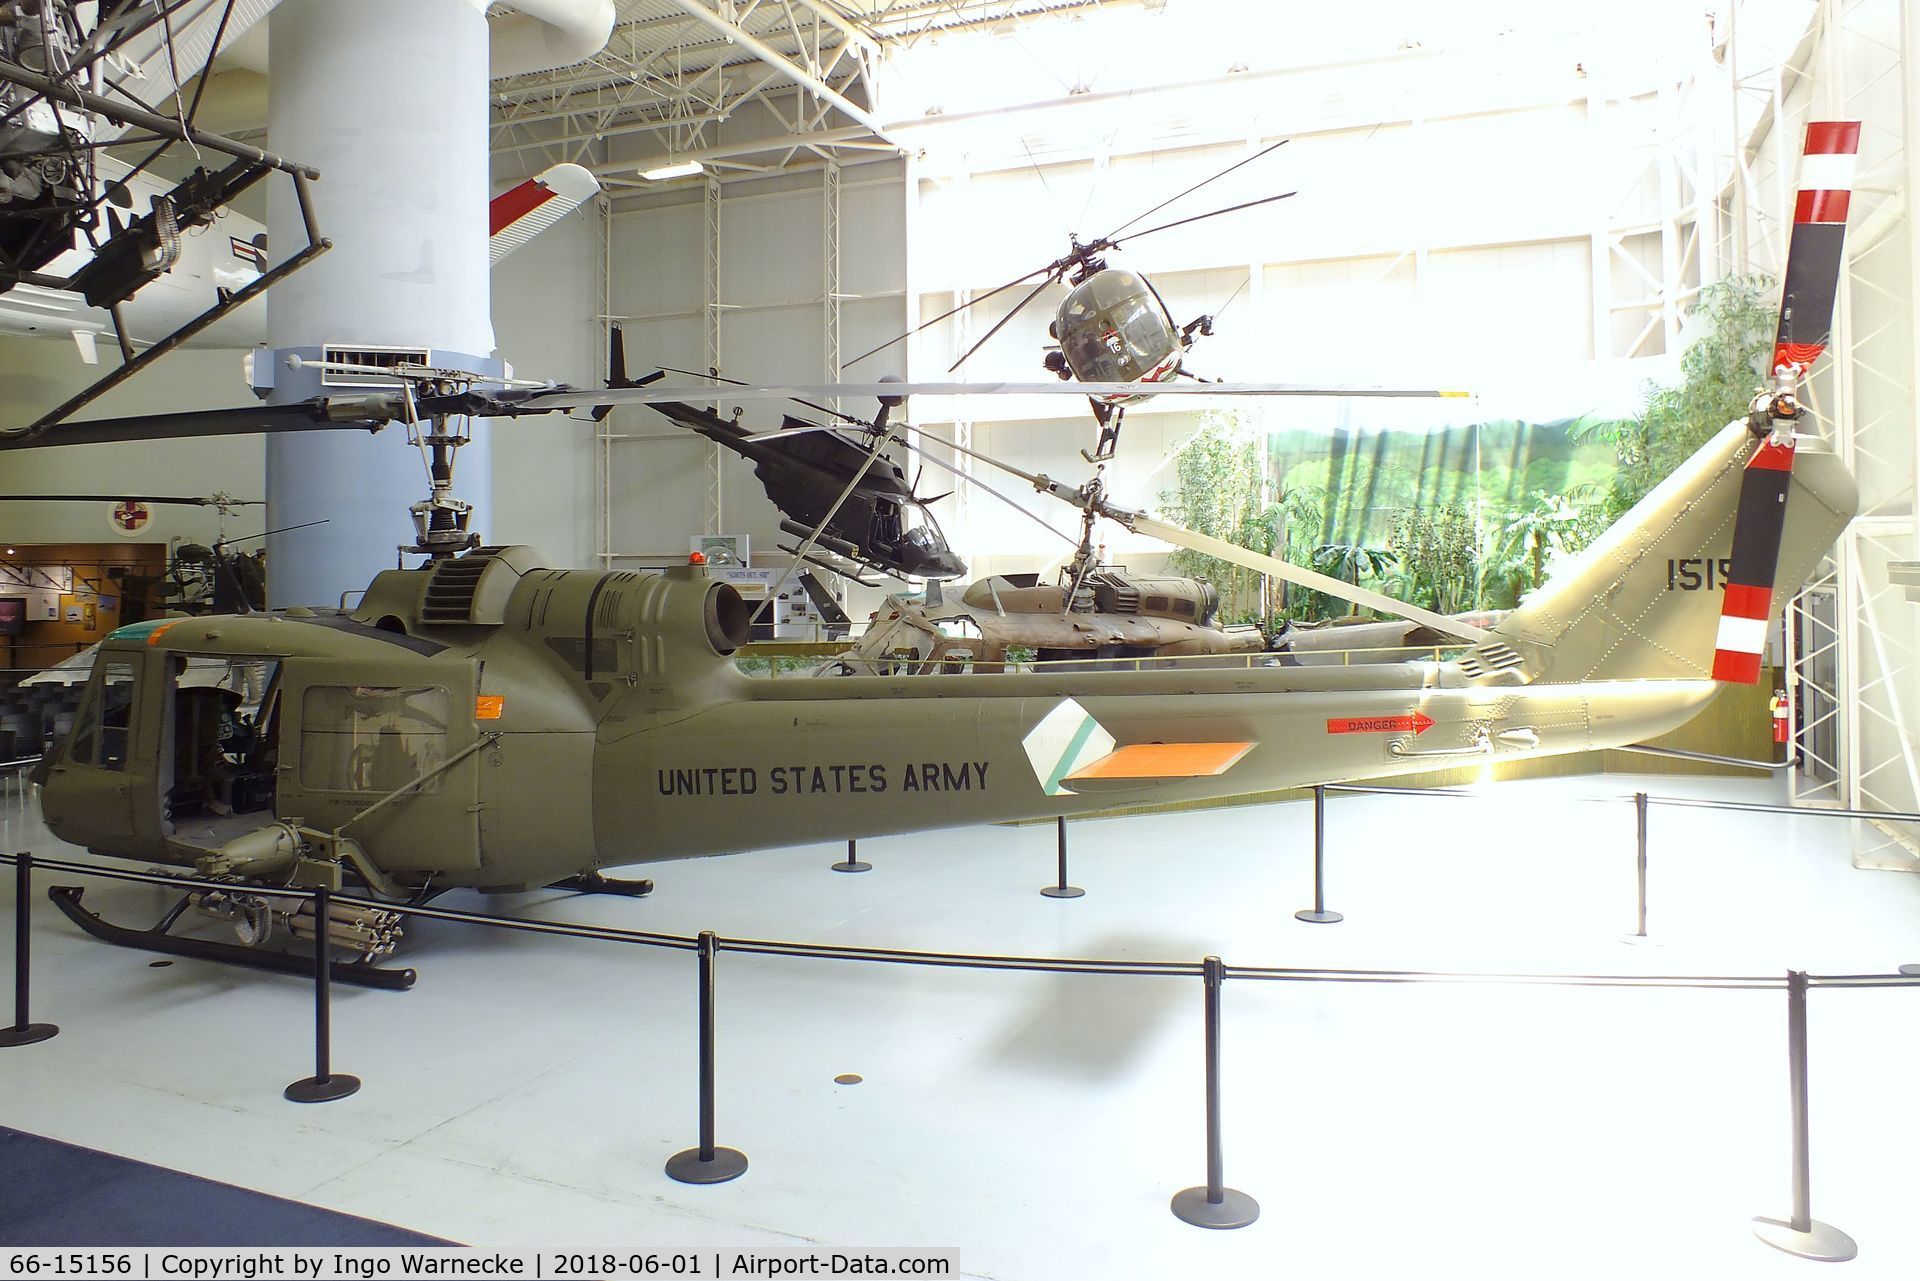 66-15156, 1966 Bell UH-1M Iroquois C/N 1884, Bell UH-1M Iroquois gunship at the US Army Aviation Museum, Ft. Rucker